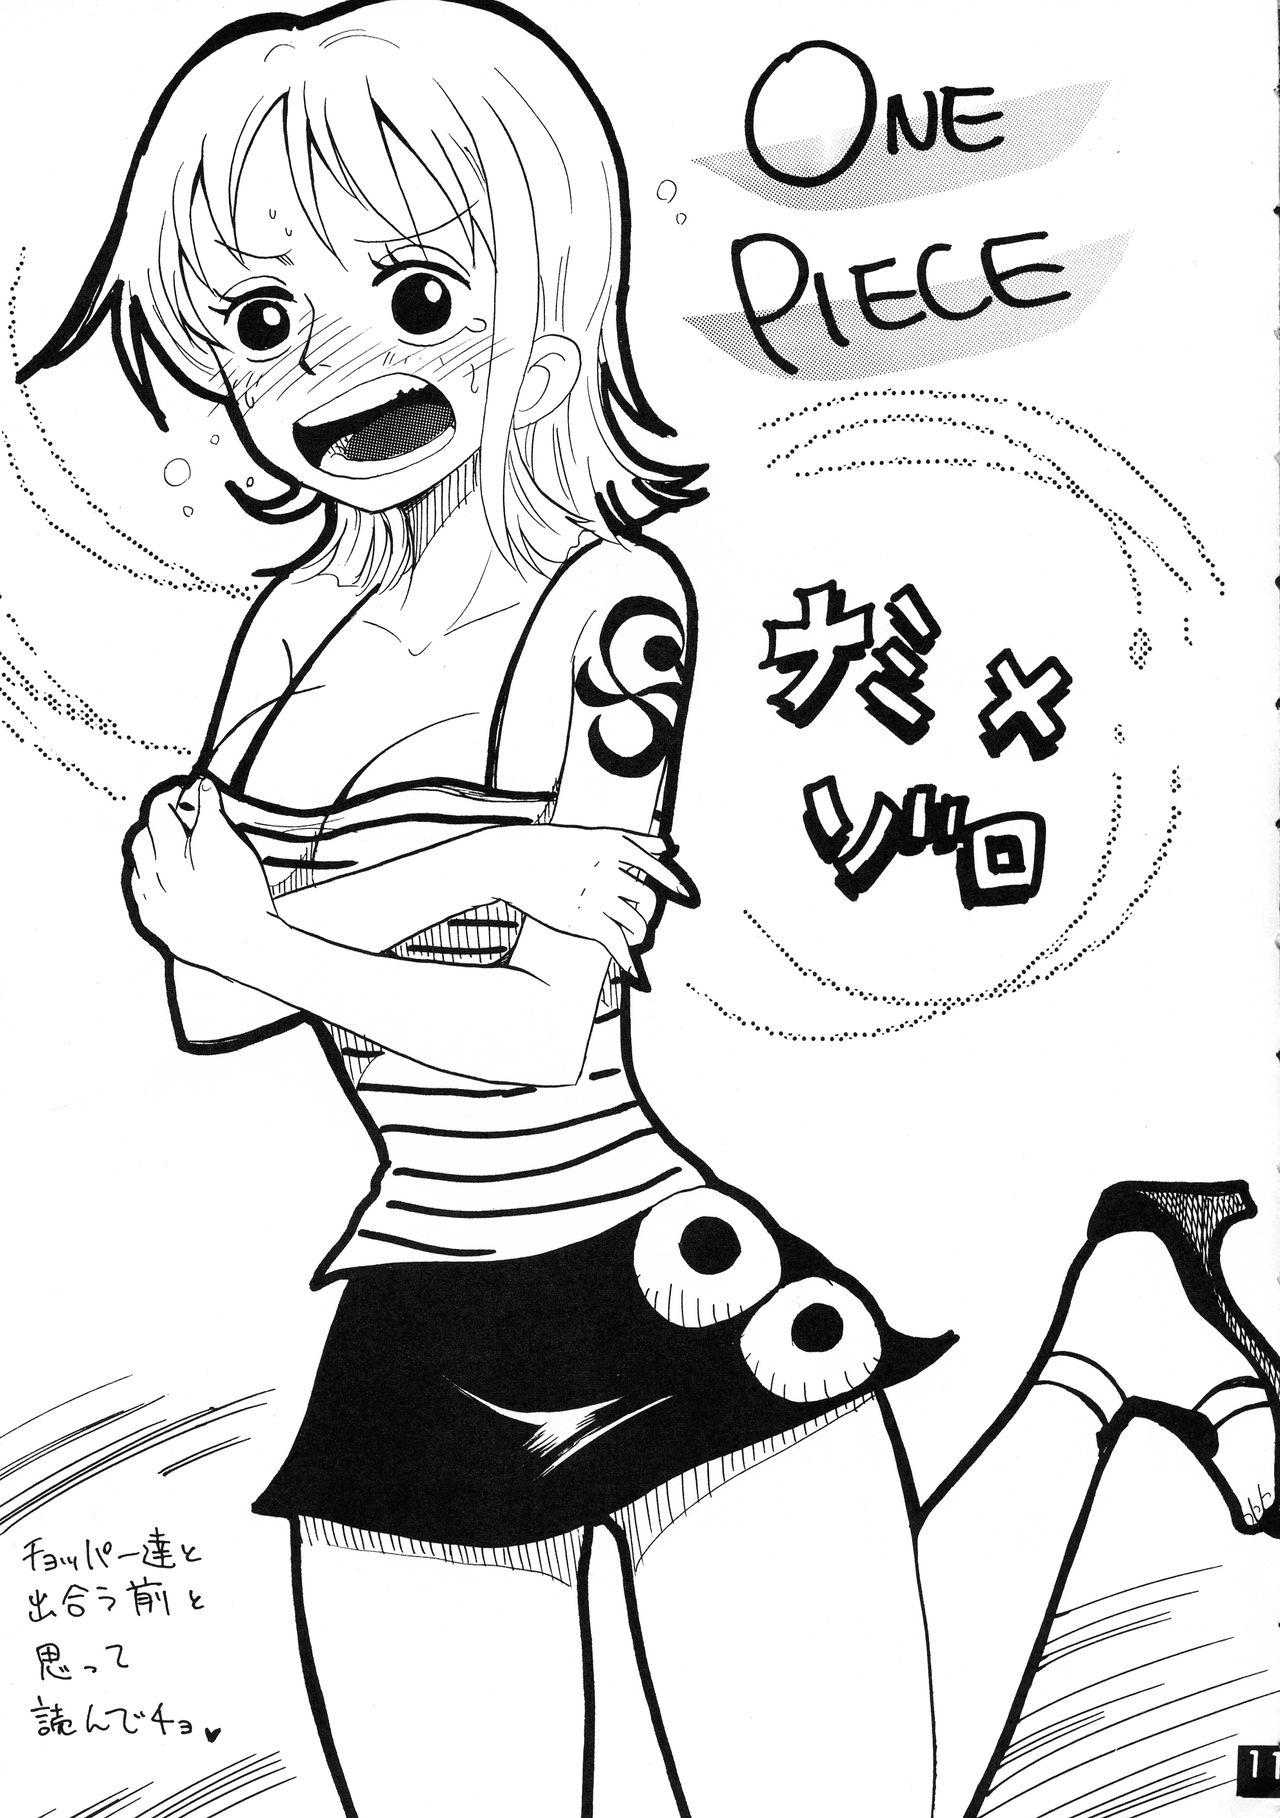 She Jump DX - One piece Bleach Yu-gi-oh Black cat Pretty face Lingerie - Page 11